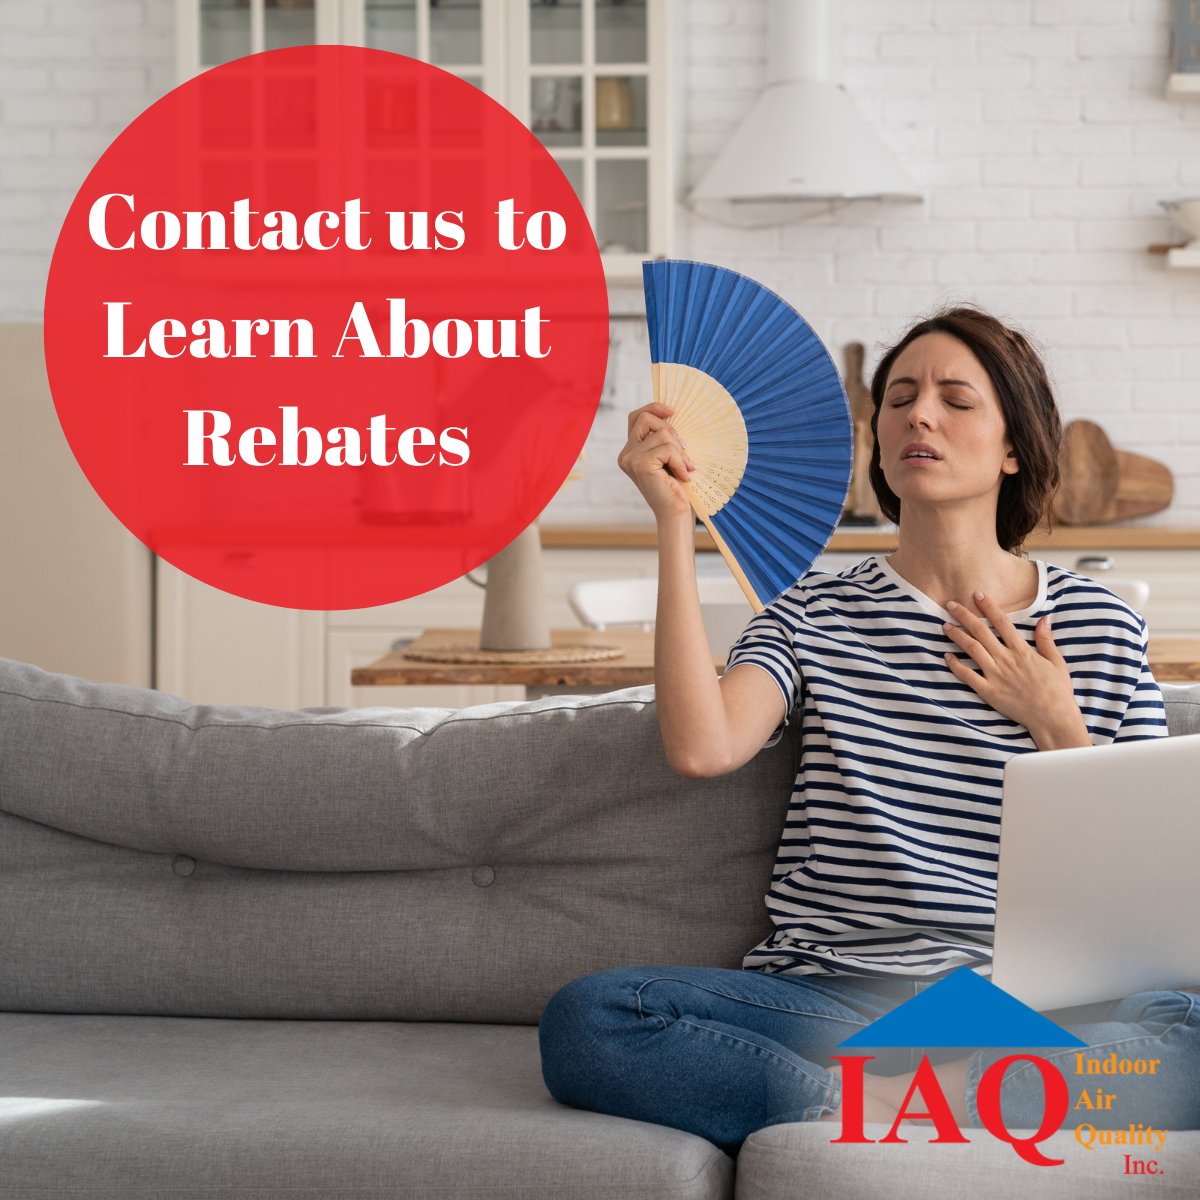 Is Your Home Uncomfortably Warm?

You don't have to live with a broken or inefficient HVAC system. Contact us today to learn about rebates from Xcel, air conditioner manufacturers, and our current specials!

#HVACcontractors #HVACexperts #HVACcolorado